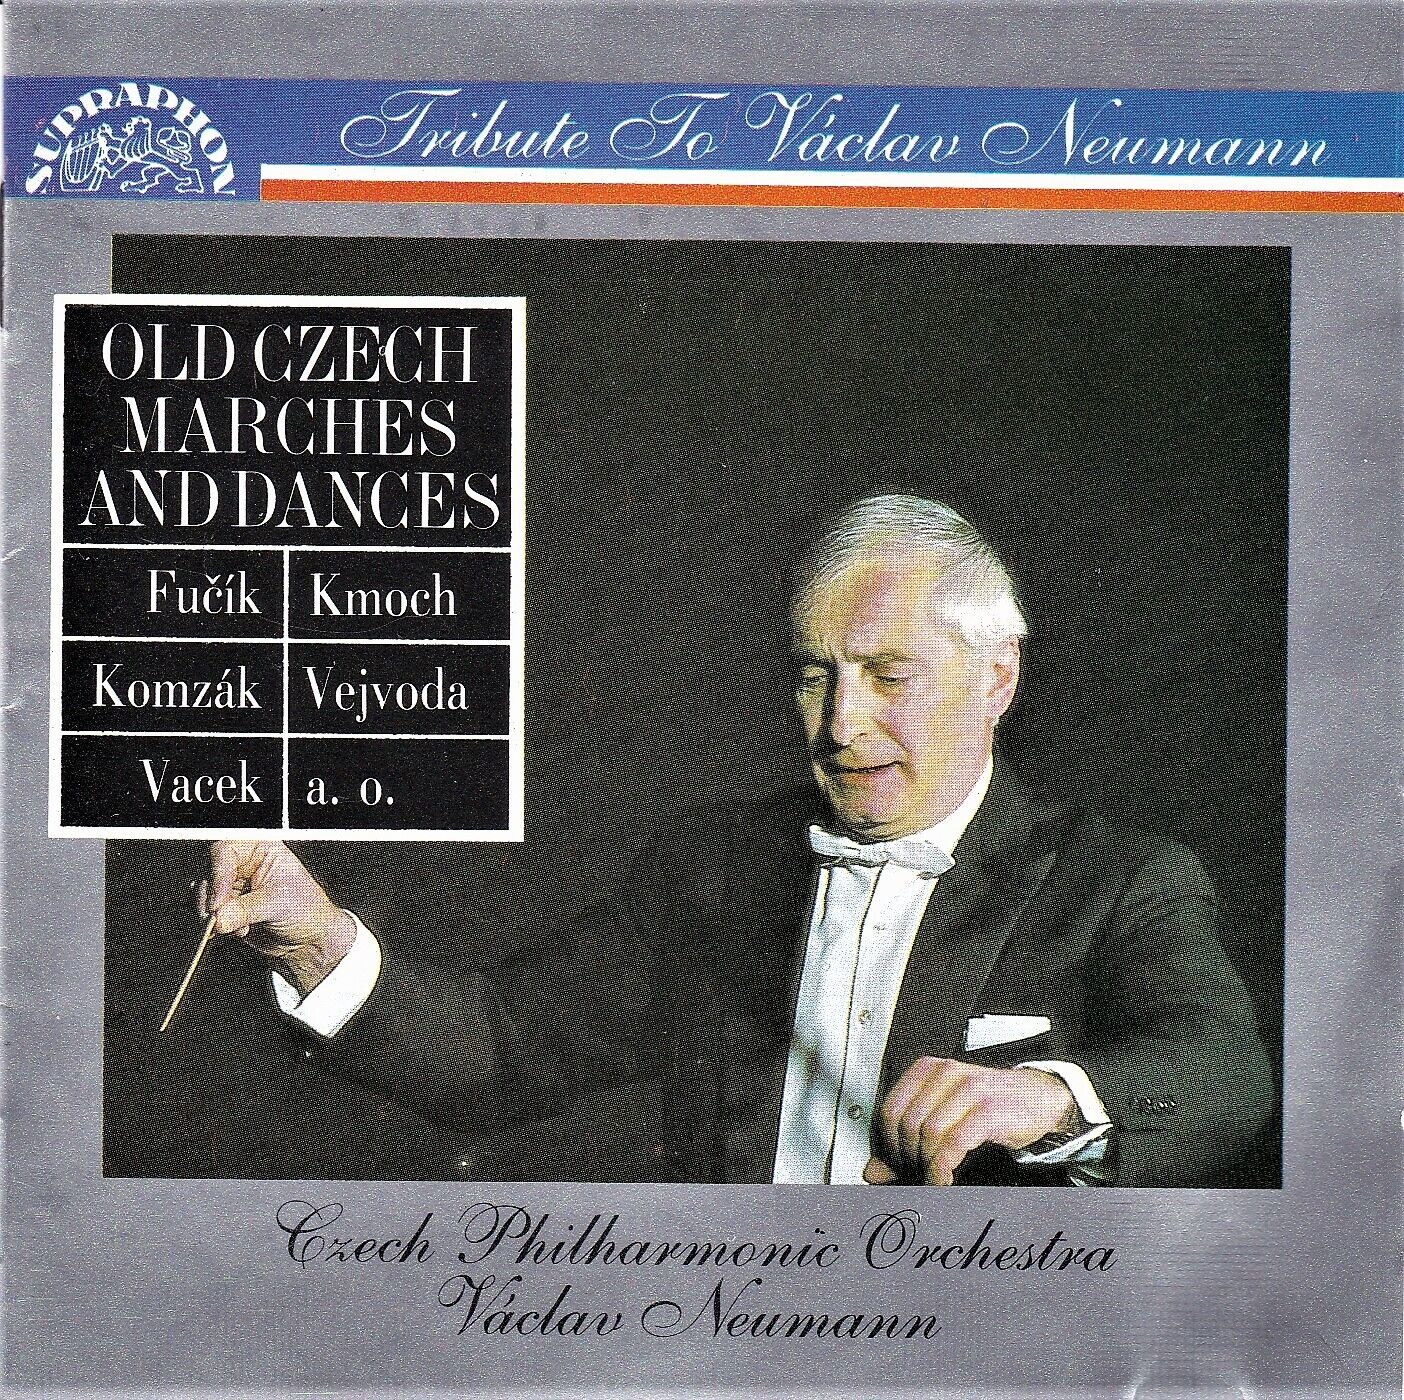 OLD CZECH MARCHES AND DANCES /TRIBUTE TO VÁCLAV NEUMANN - NEAR MINT CD Free Shpg